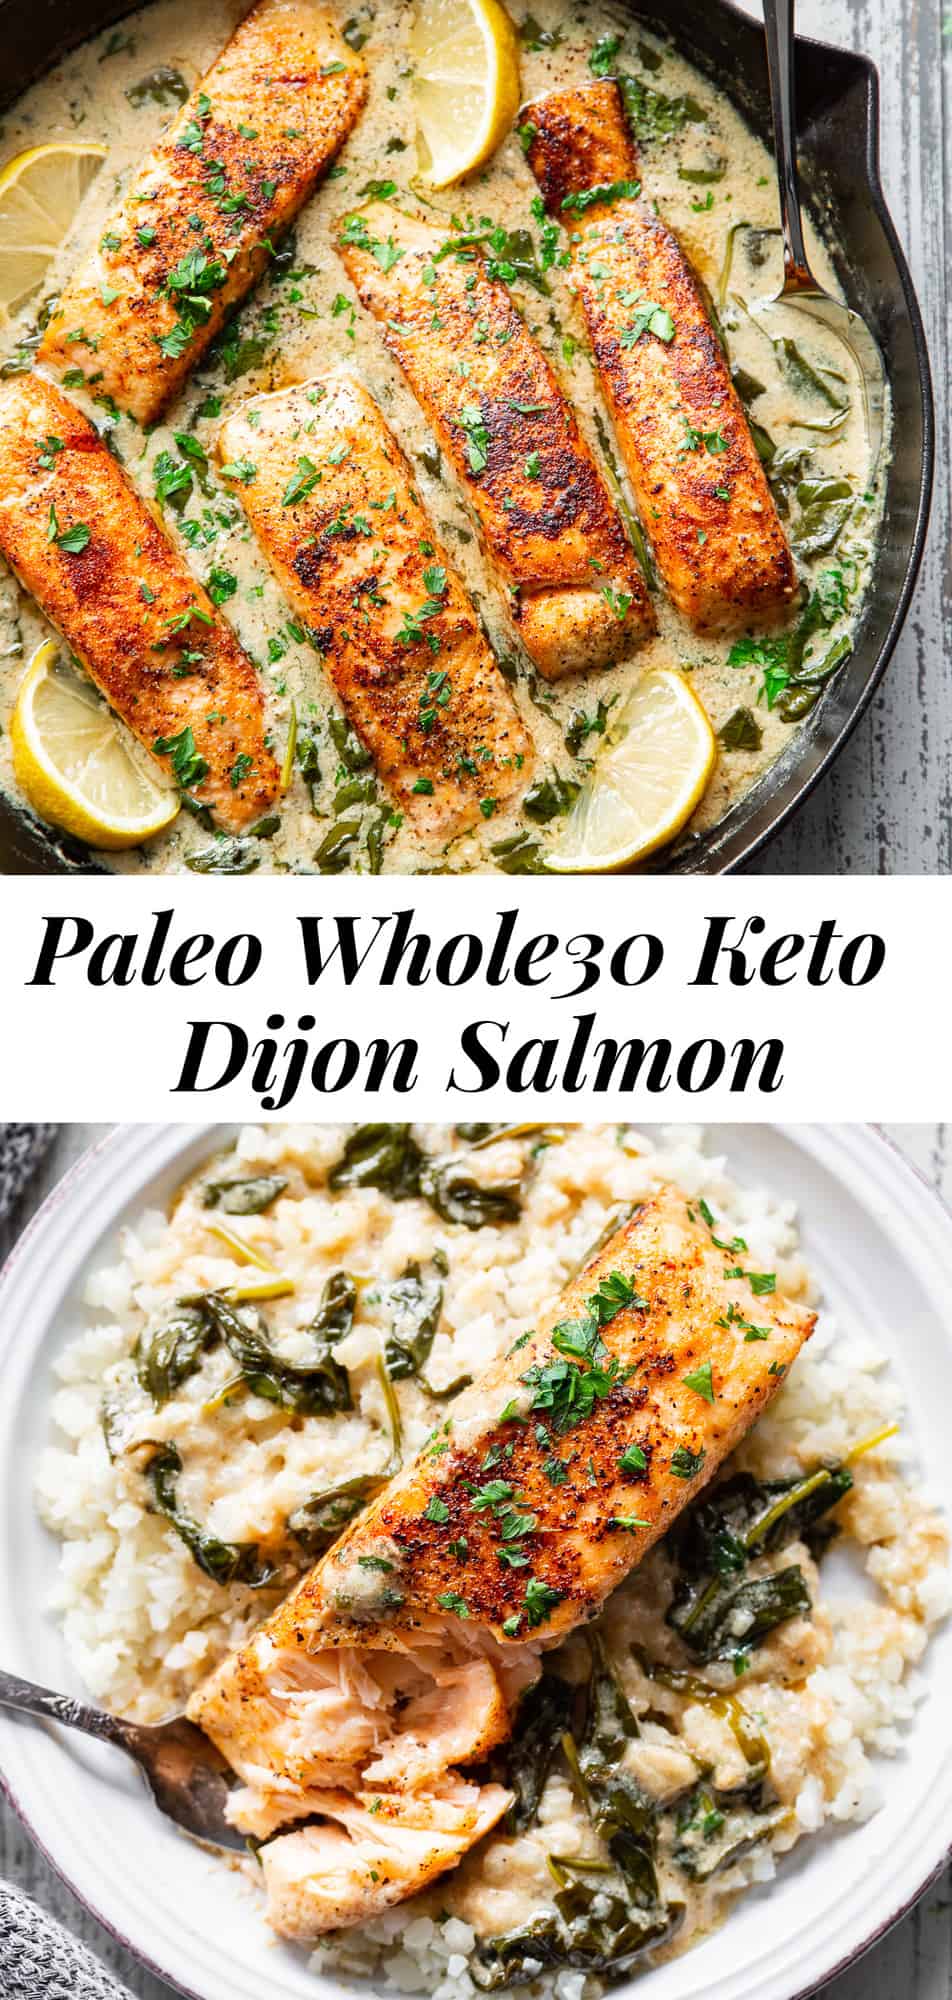 This creamy dijon salmon is made all in one skillet in just 20 minutes! It’s packed with flavor, perfect for weeknights and even kid approved. This easy paleo dinner is also Whole30 compliant and low in carbs, for a healthy meal you’ll want on repeat! #paleo #keto #whole30 #cleaneating 